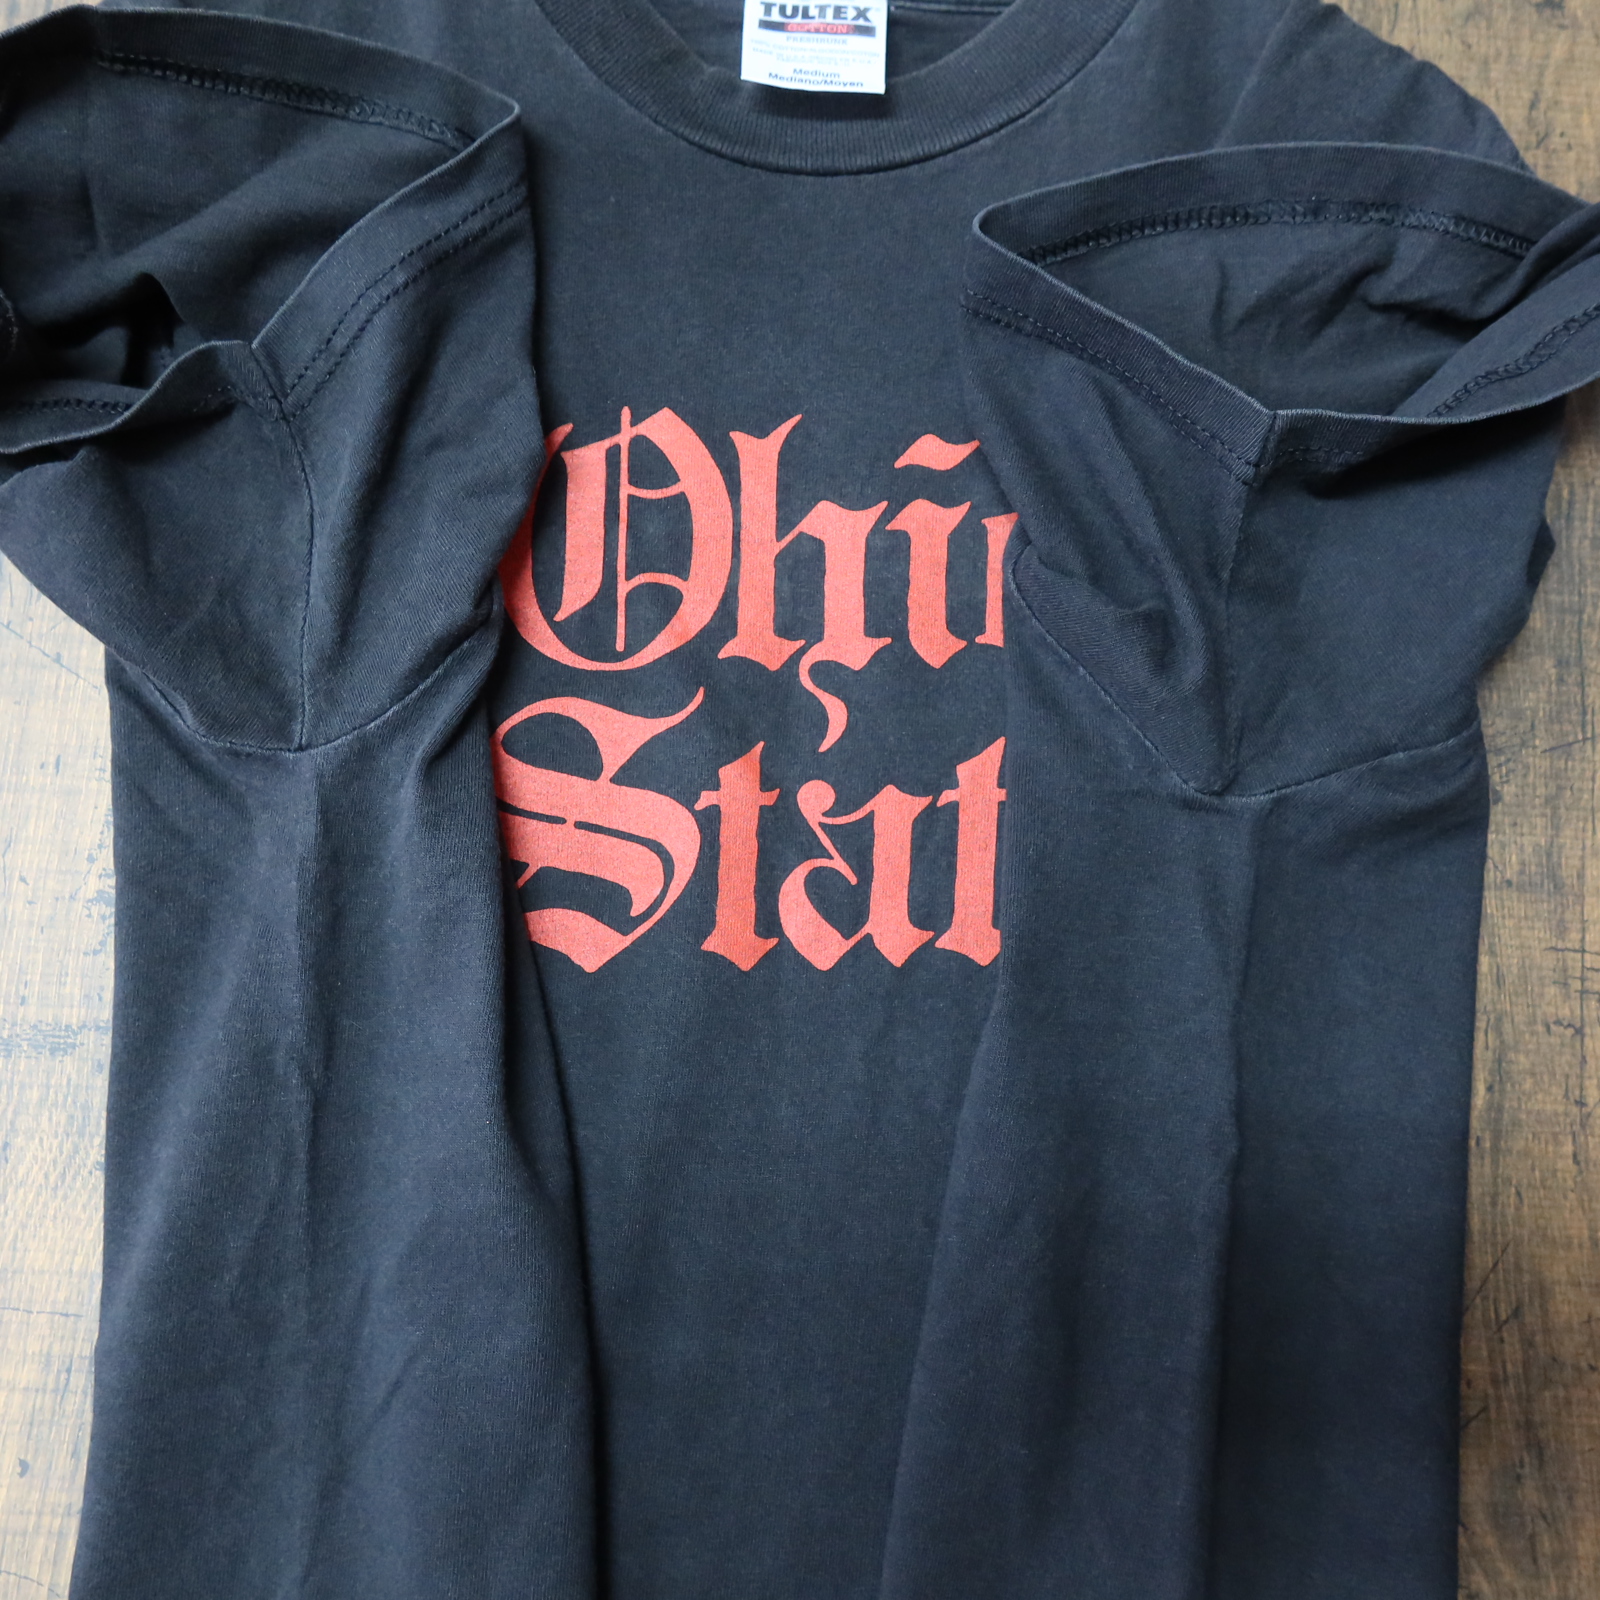 90s～ Vintage US古着☆Unknown 半袖 プリント Tシャツ Ohio State ...